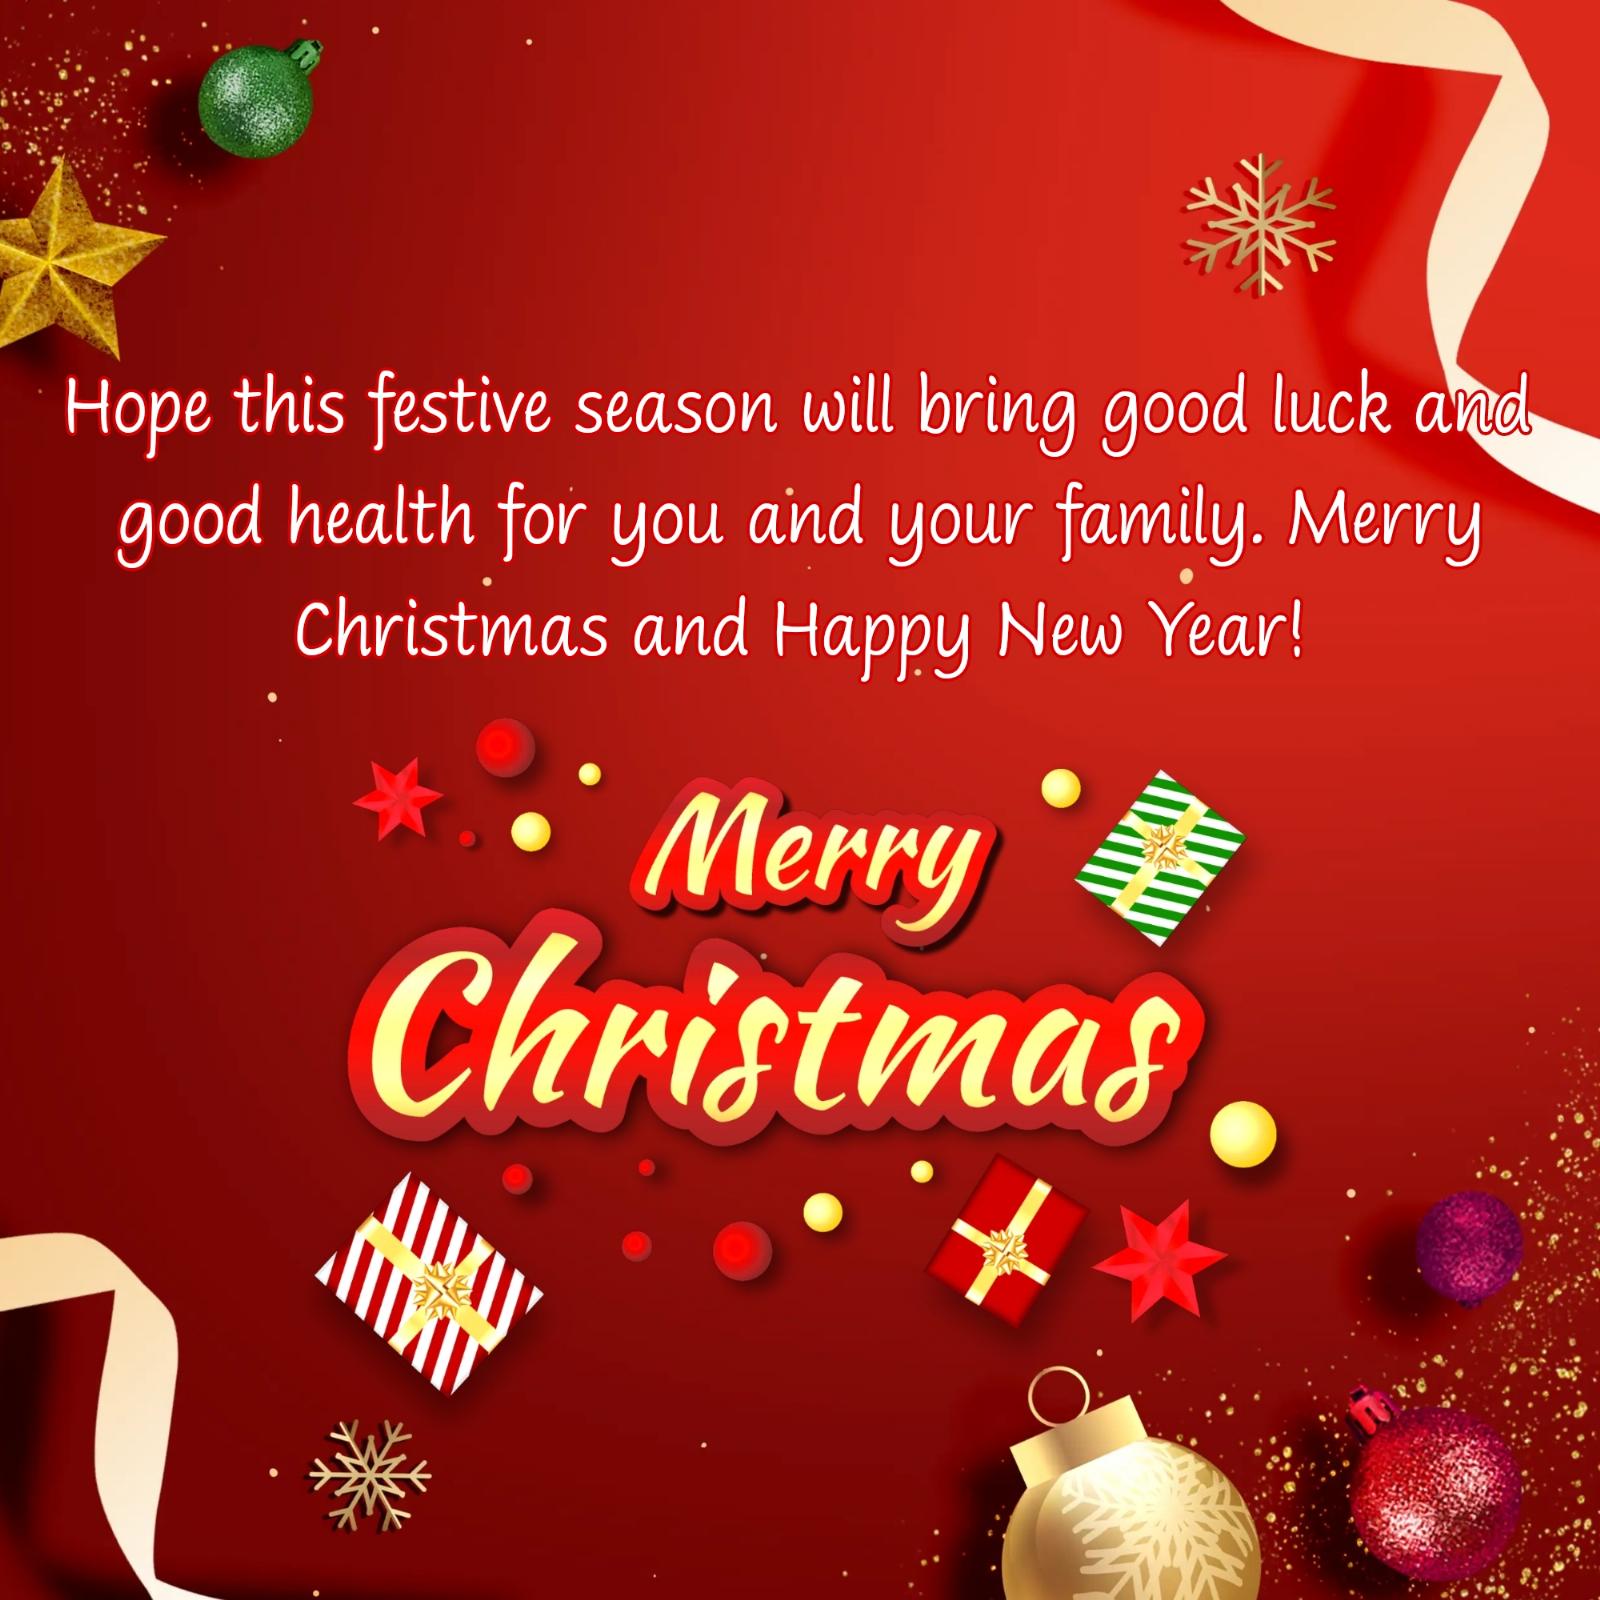 Hope this festive season will bring good luck and good health